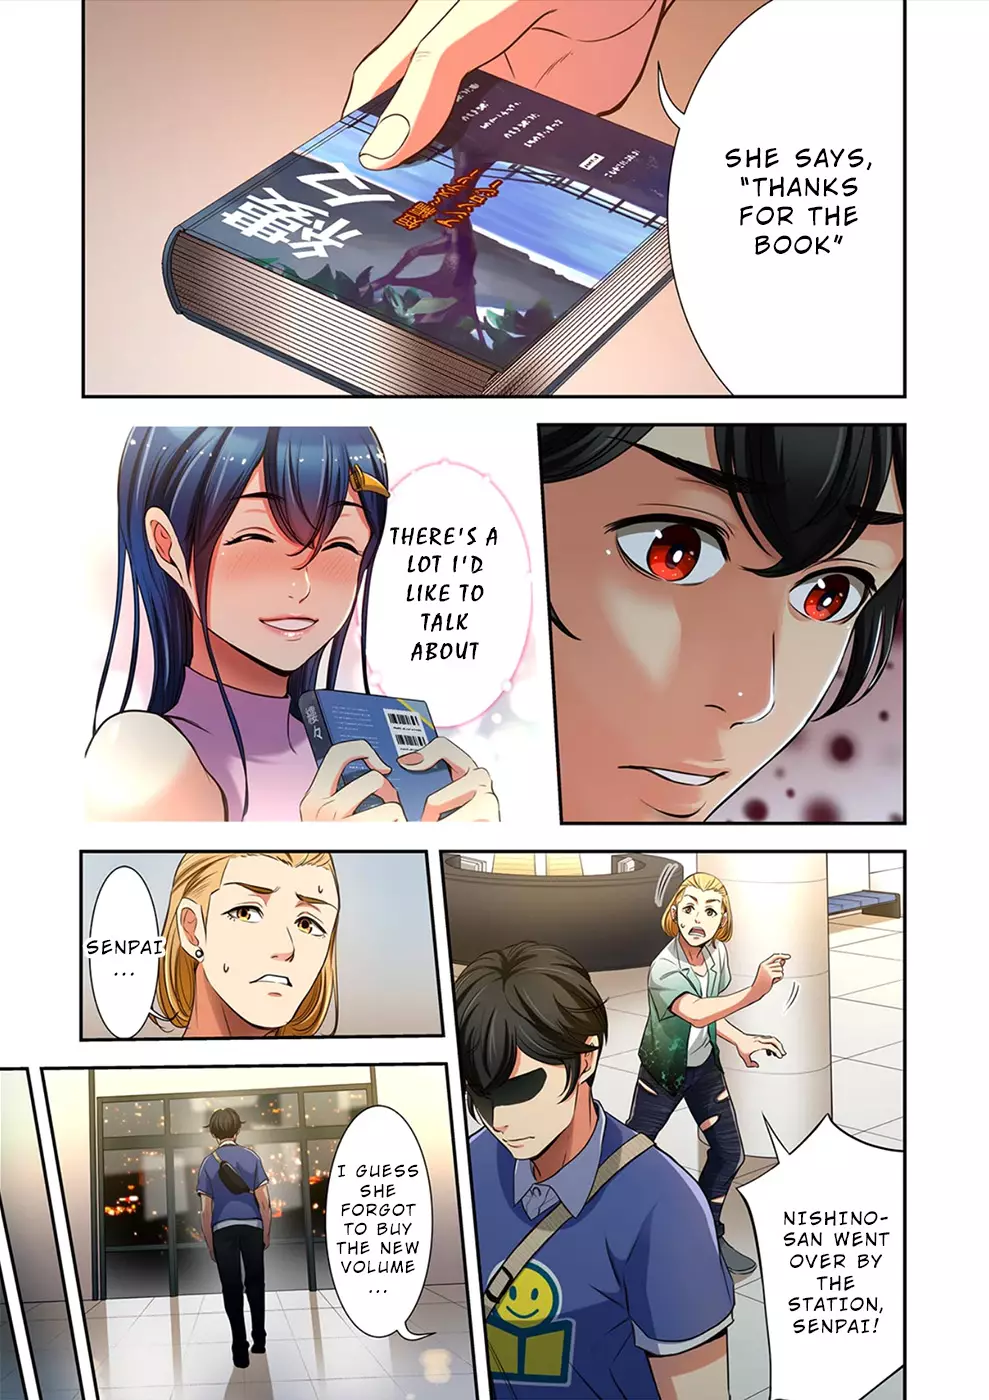 100% Possibility Of Meeting Girls - 14 page 4-6c5155c1